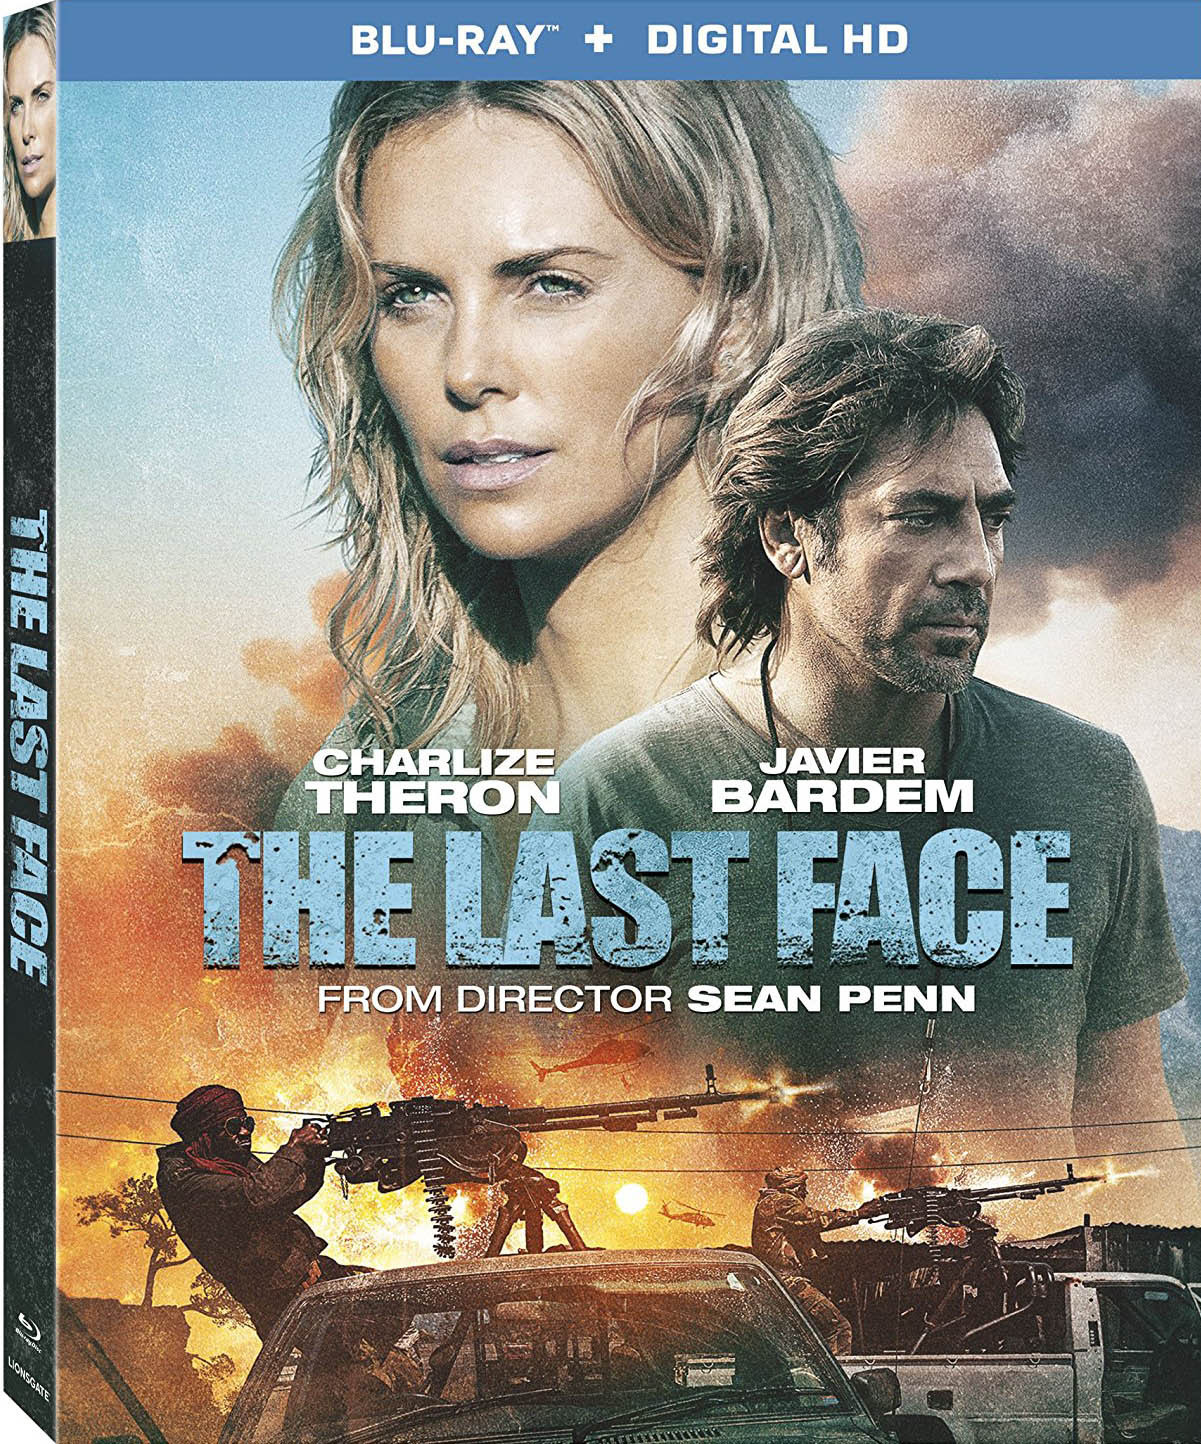 Last Face, The